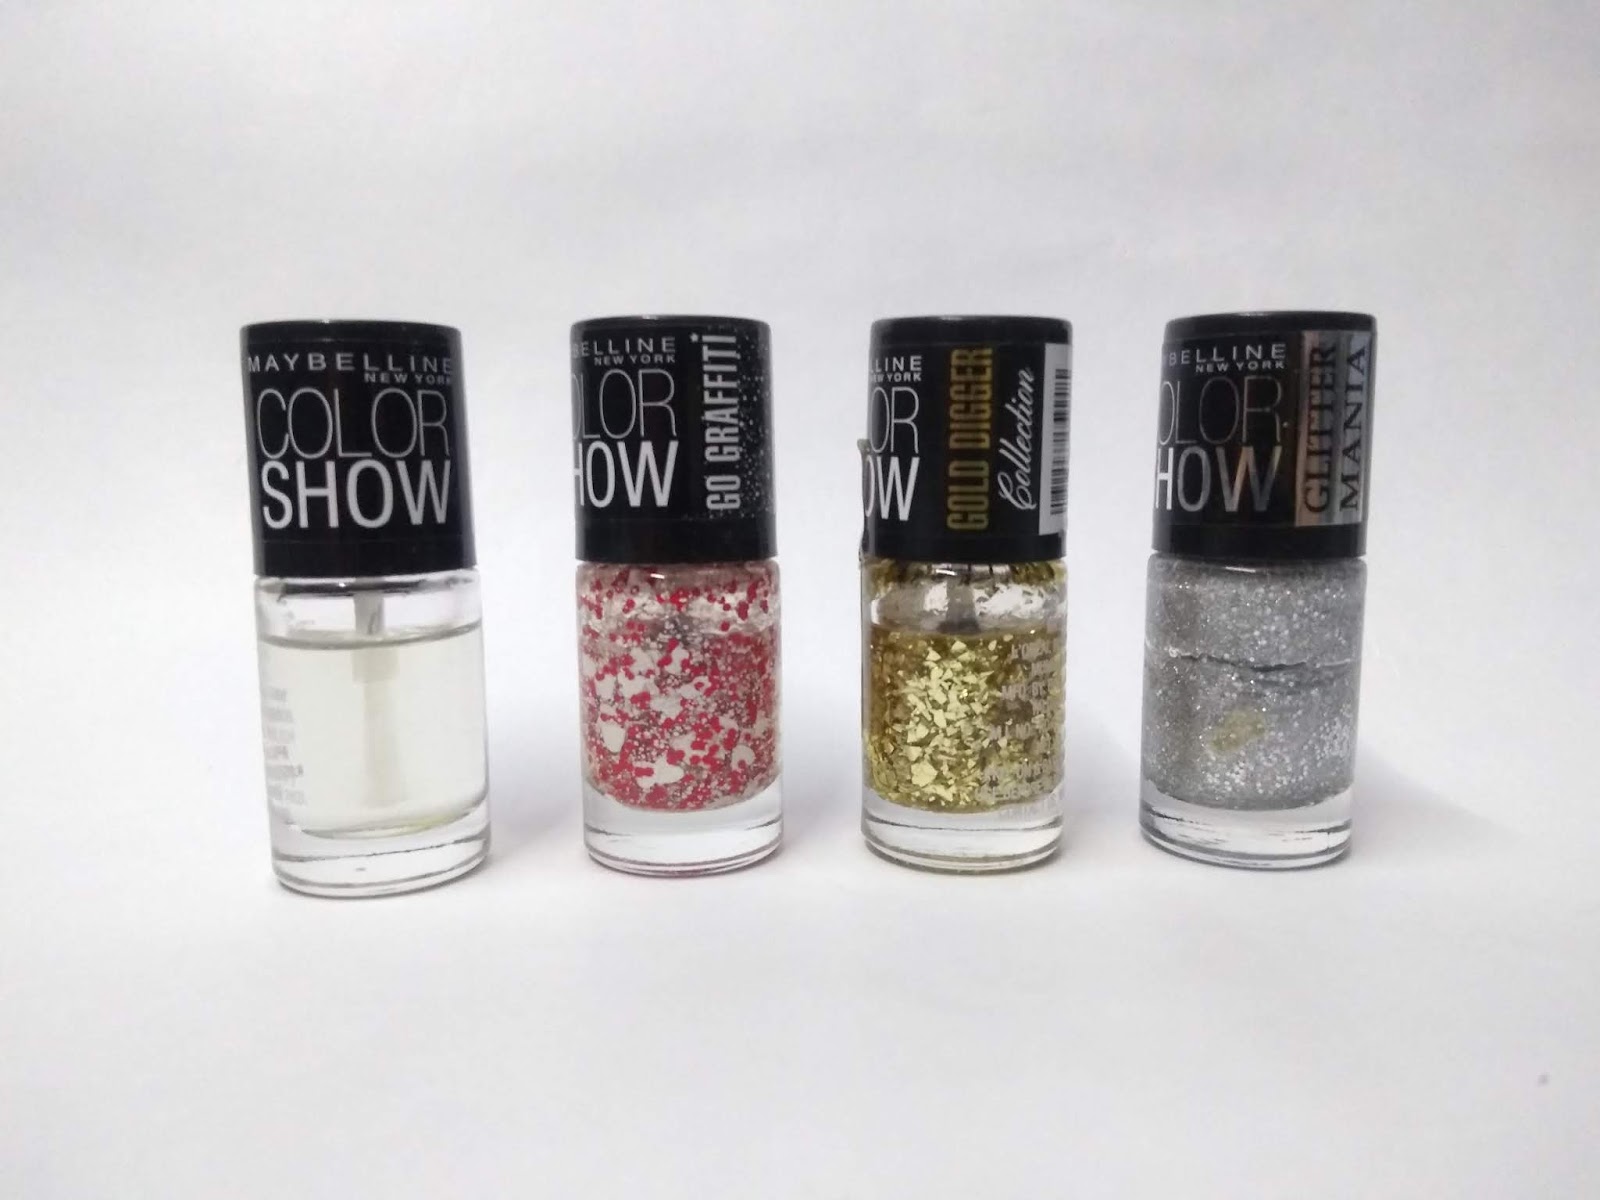 MAYBELLINE NEW YORK Color Show Glitter Mania Nail Lacquer, Red Carpet  Shimmer - Price in India, Buy MAYBELLINE NEW YORK Color Show Glitter Mania Nail  Lacquer, Red Carpet Shimmer Online In India,